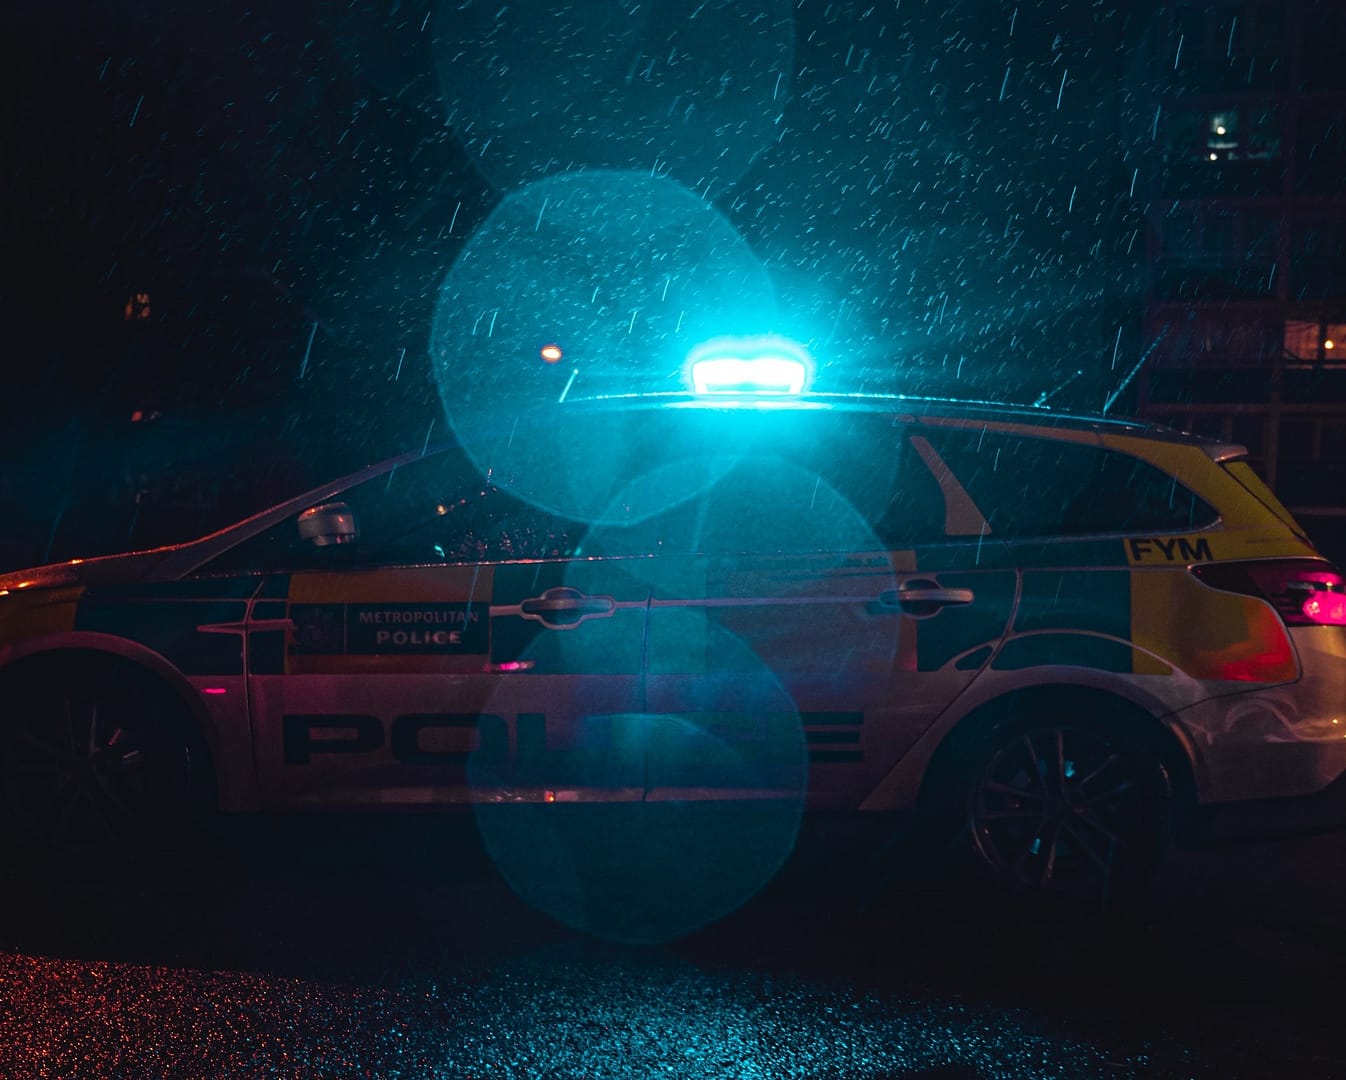 A police car lit up at night